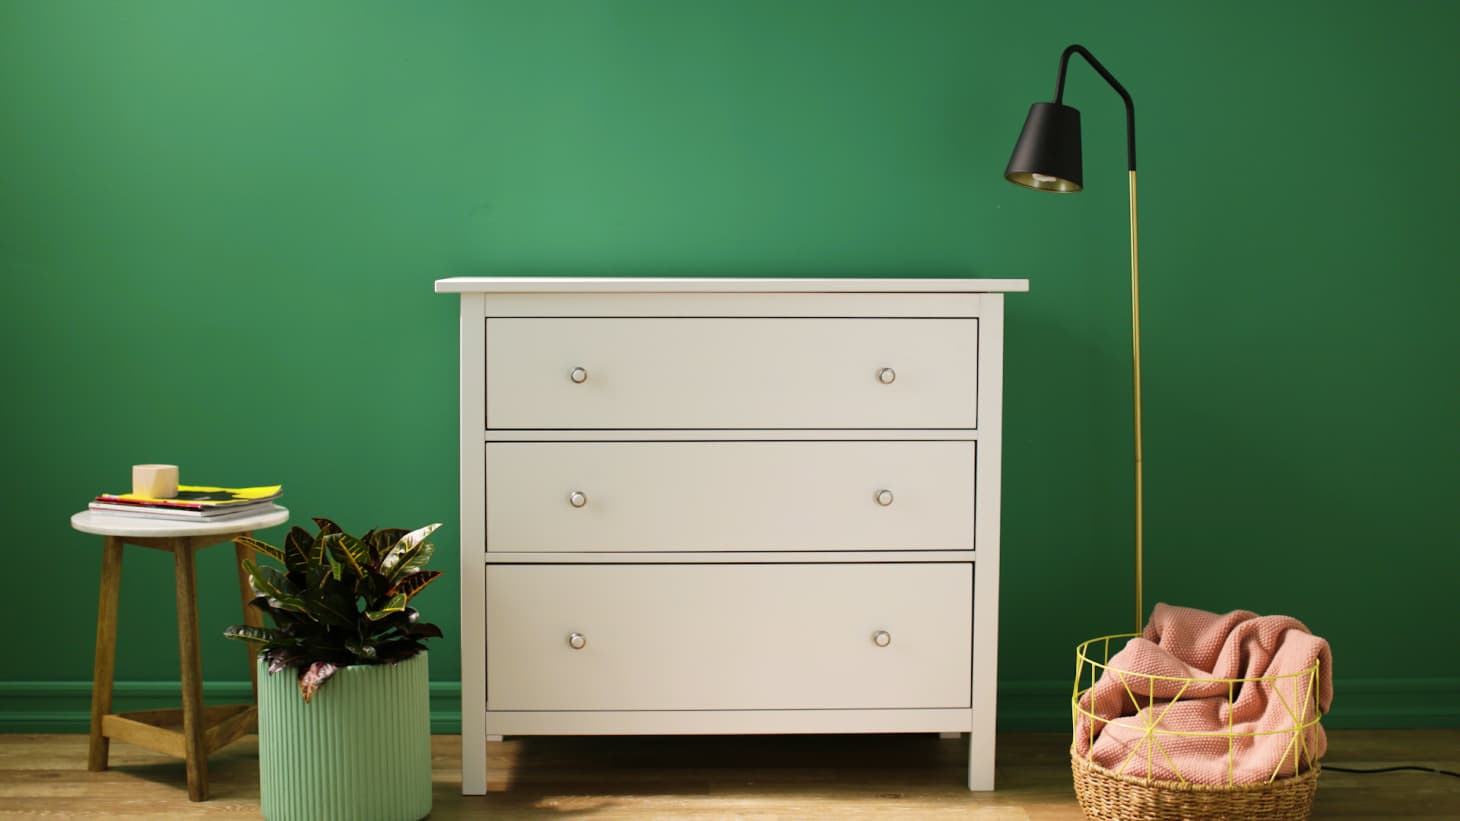 Introducing The Little Black Dresser Apartment Therapy